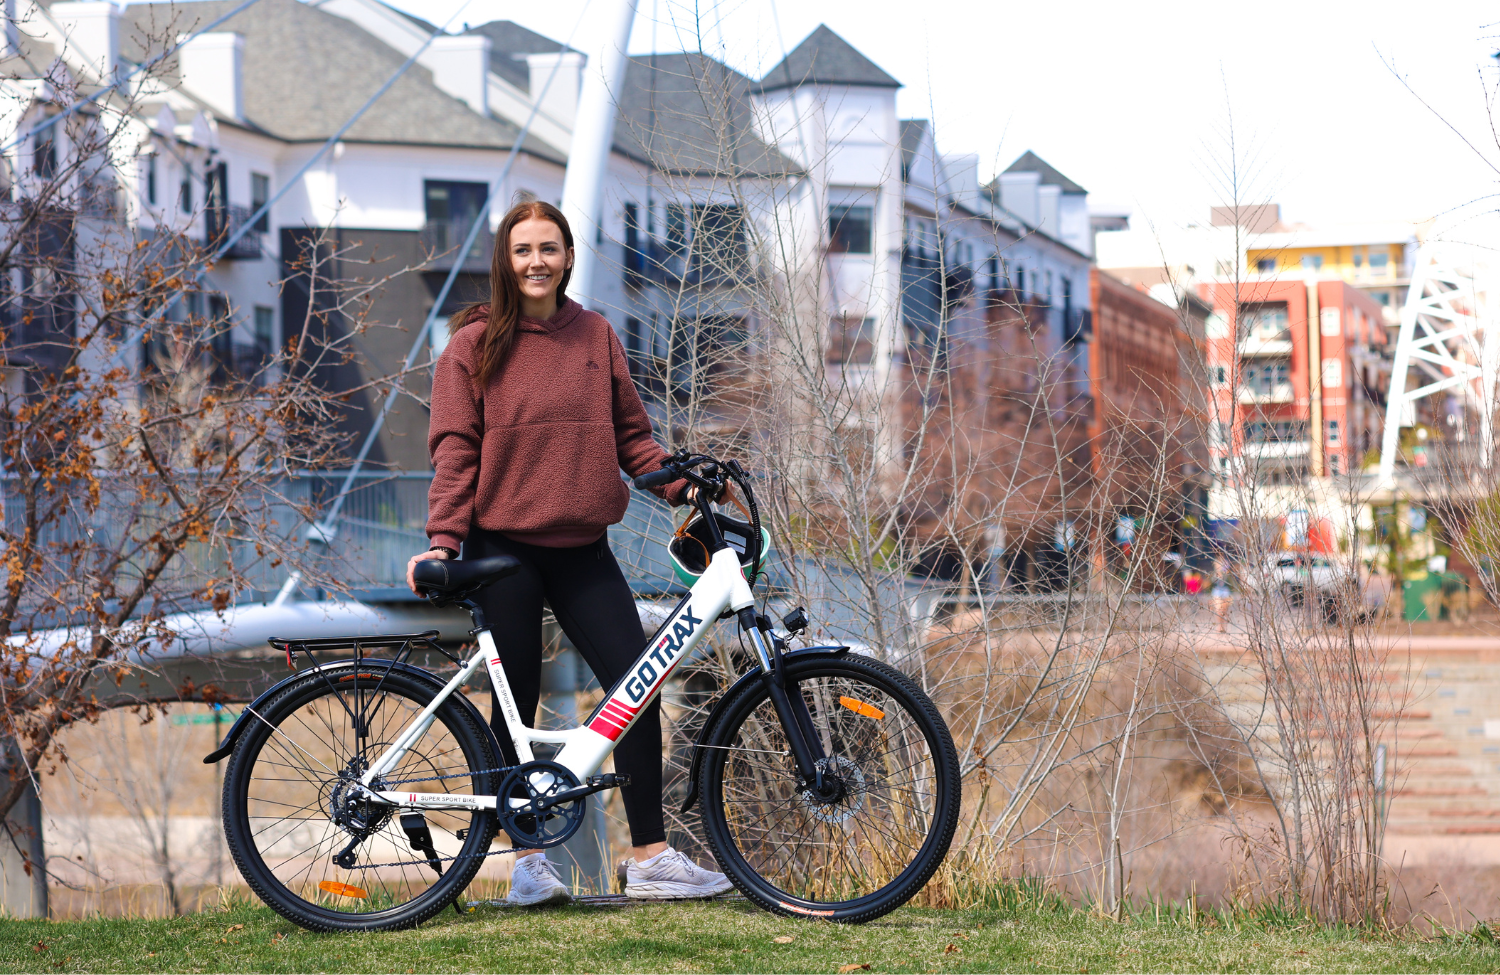 E-BIKE POPULARITY INCREASES DEMAND FOR BETTER INFRASTRUCTURE